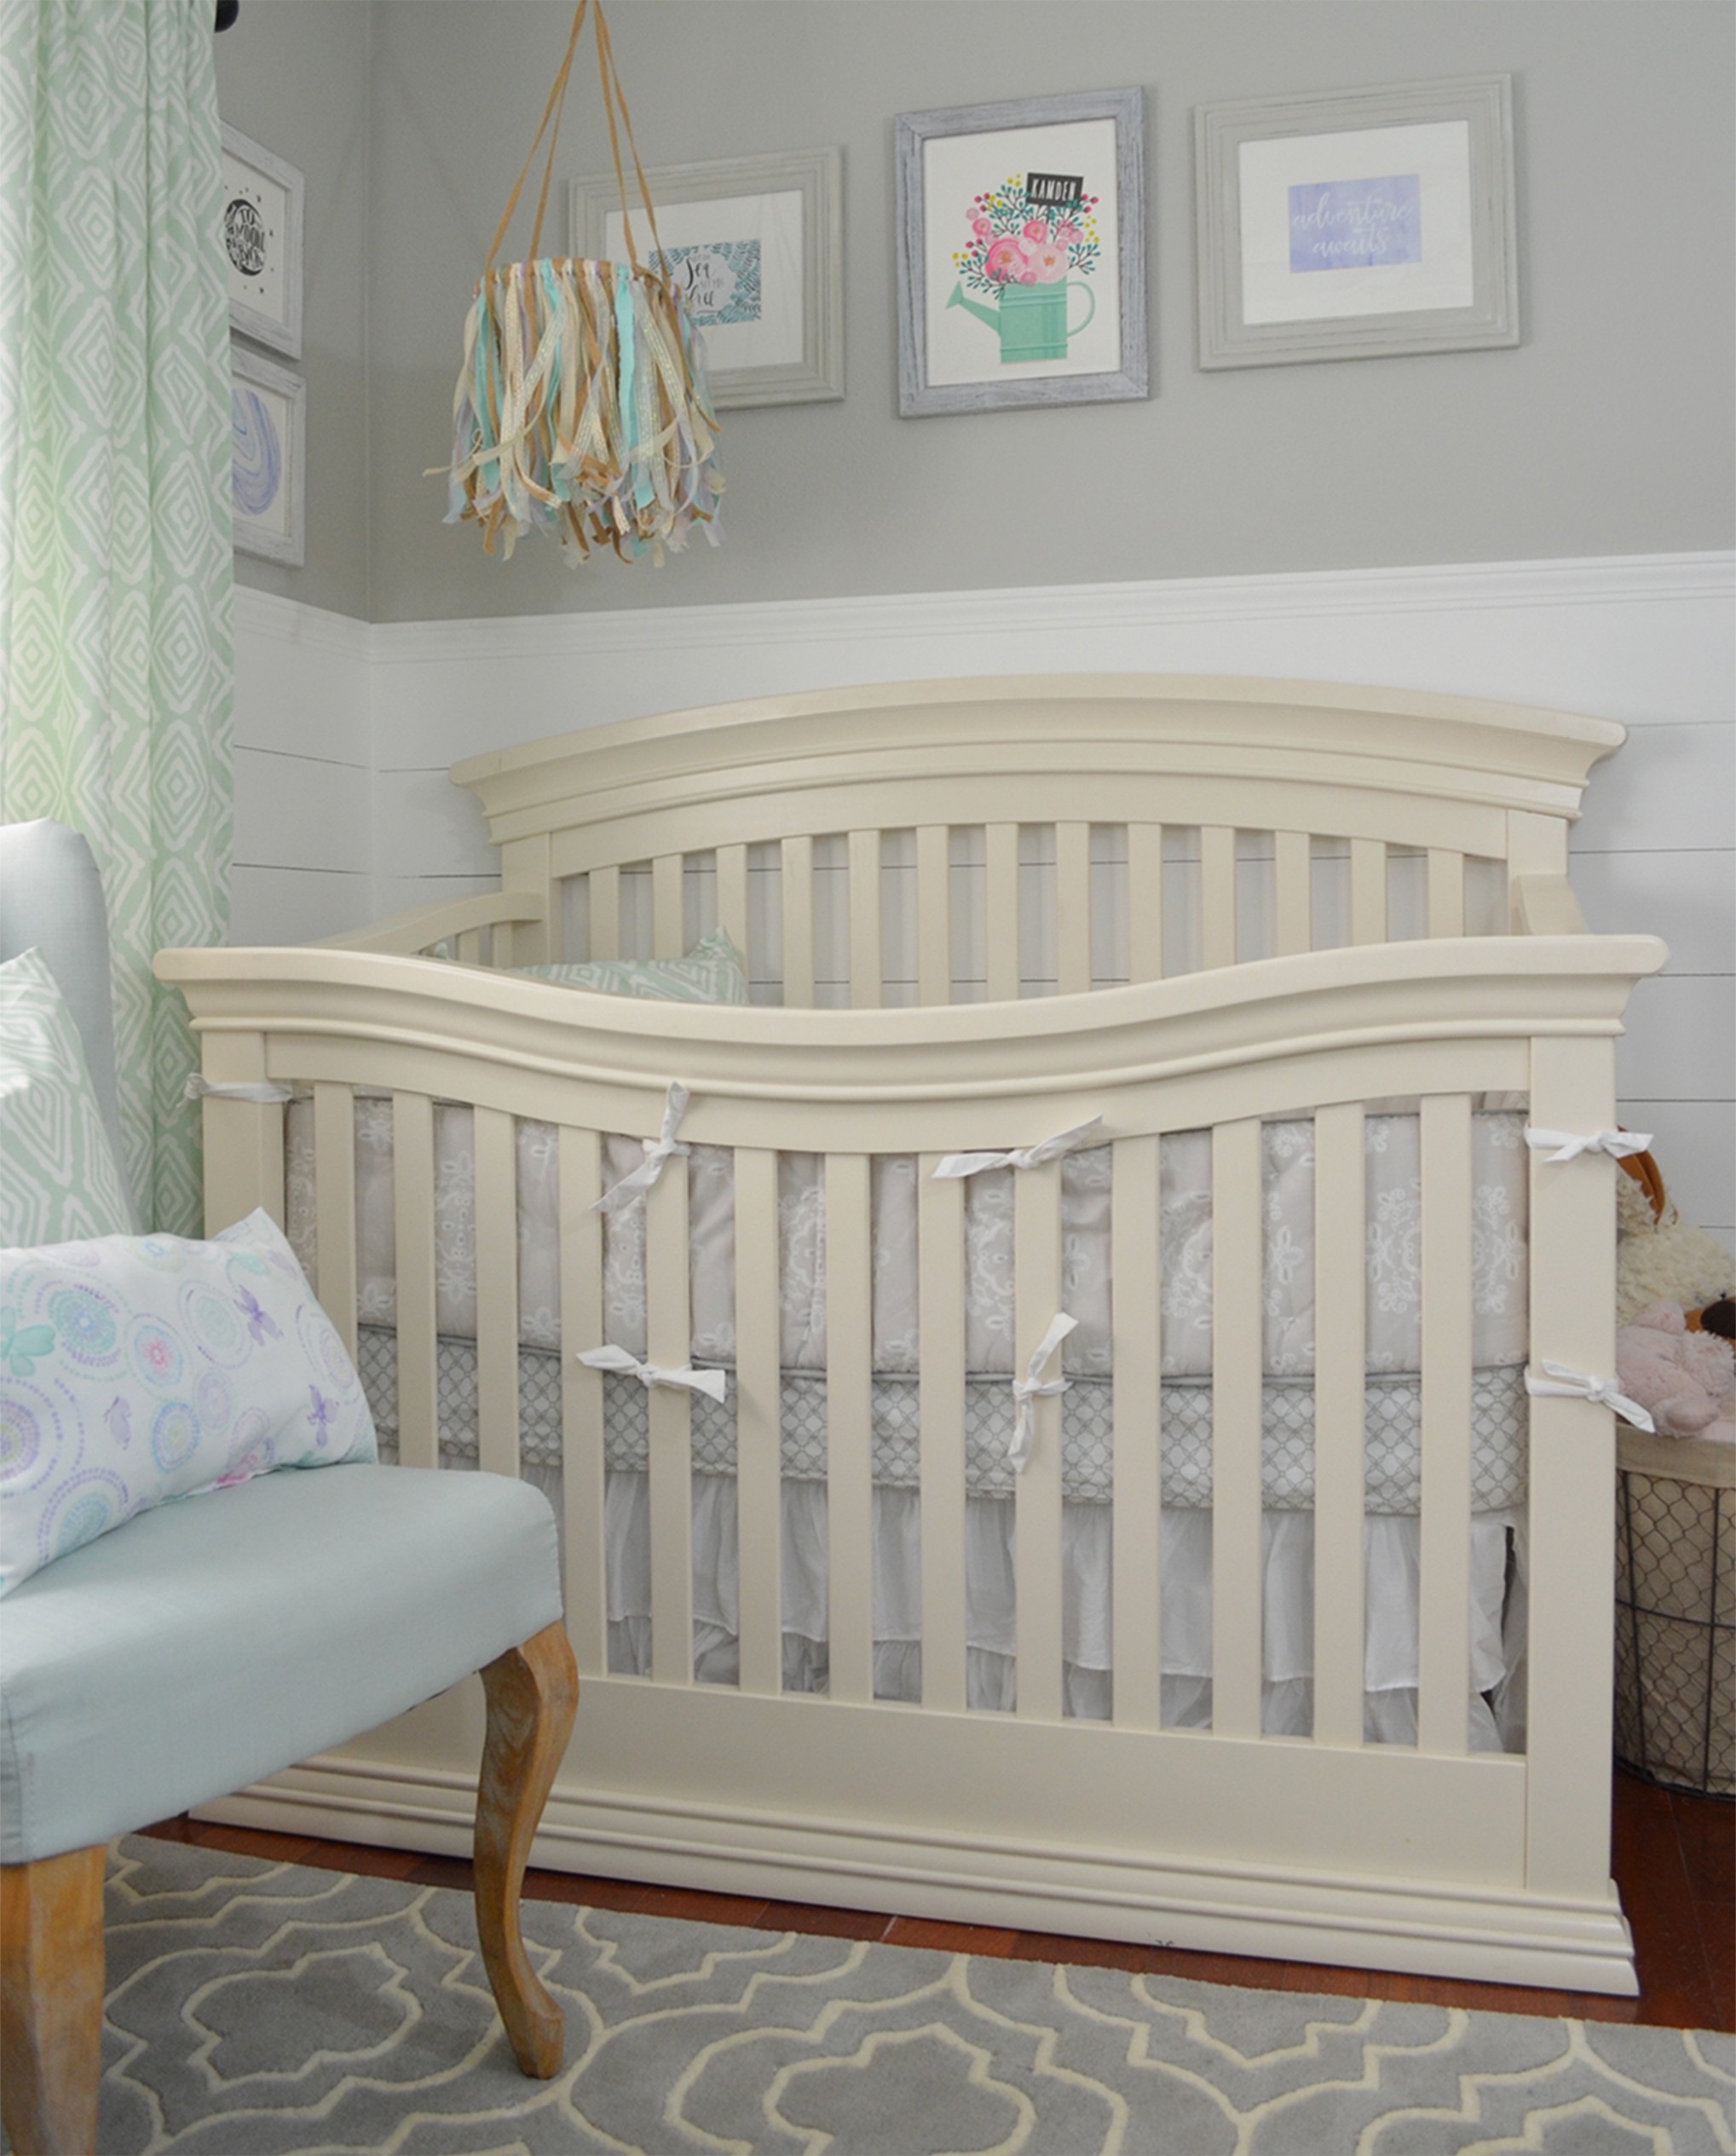 How To Chalk Paint A Crib! Where Can Buy Chalk Paint